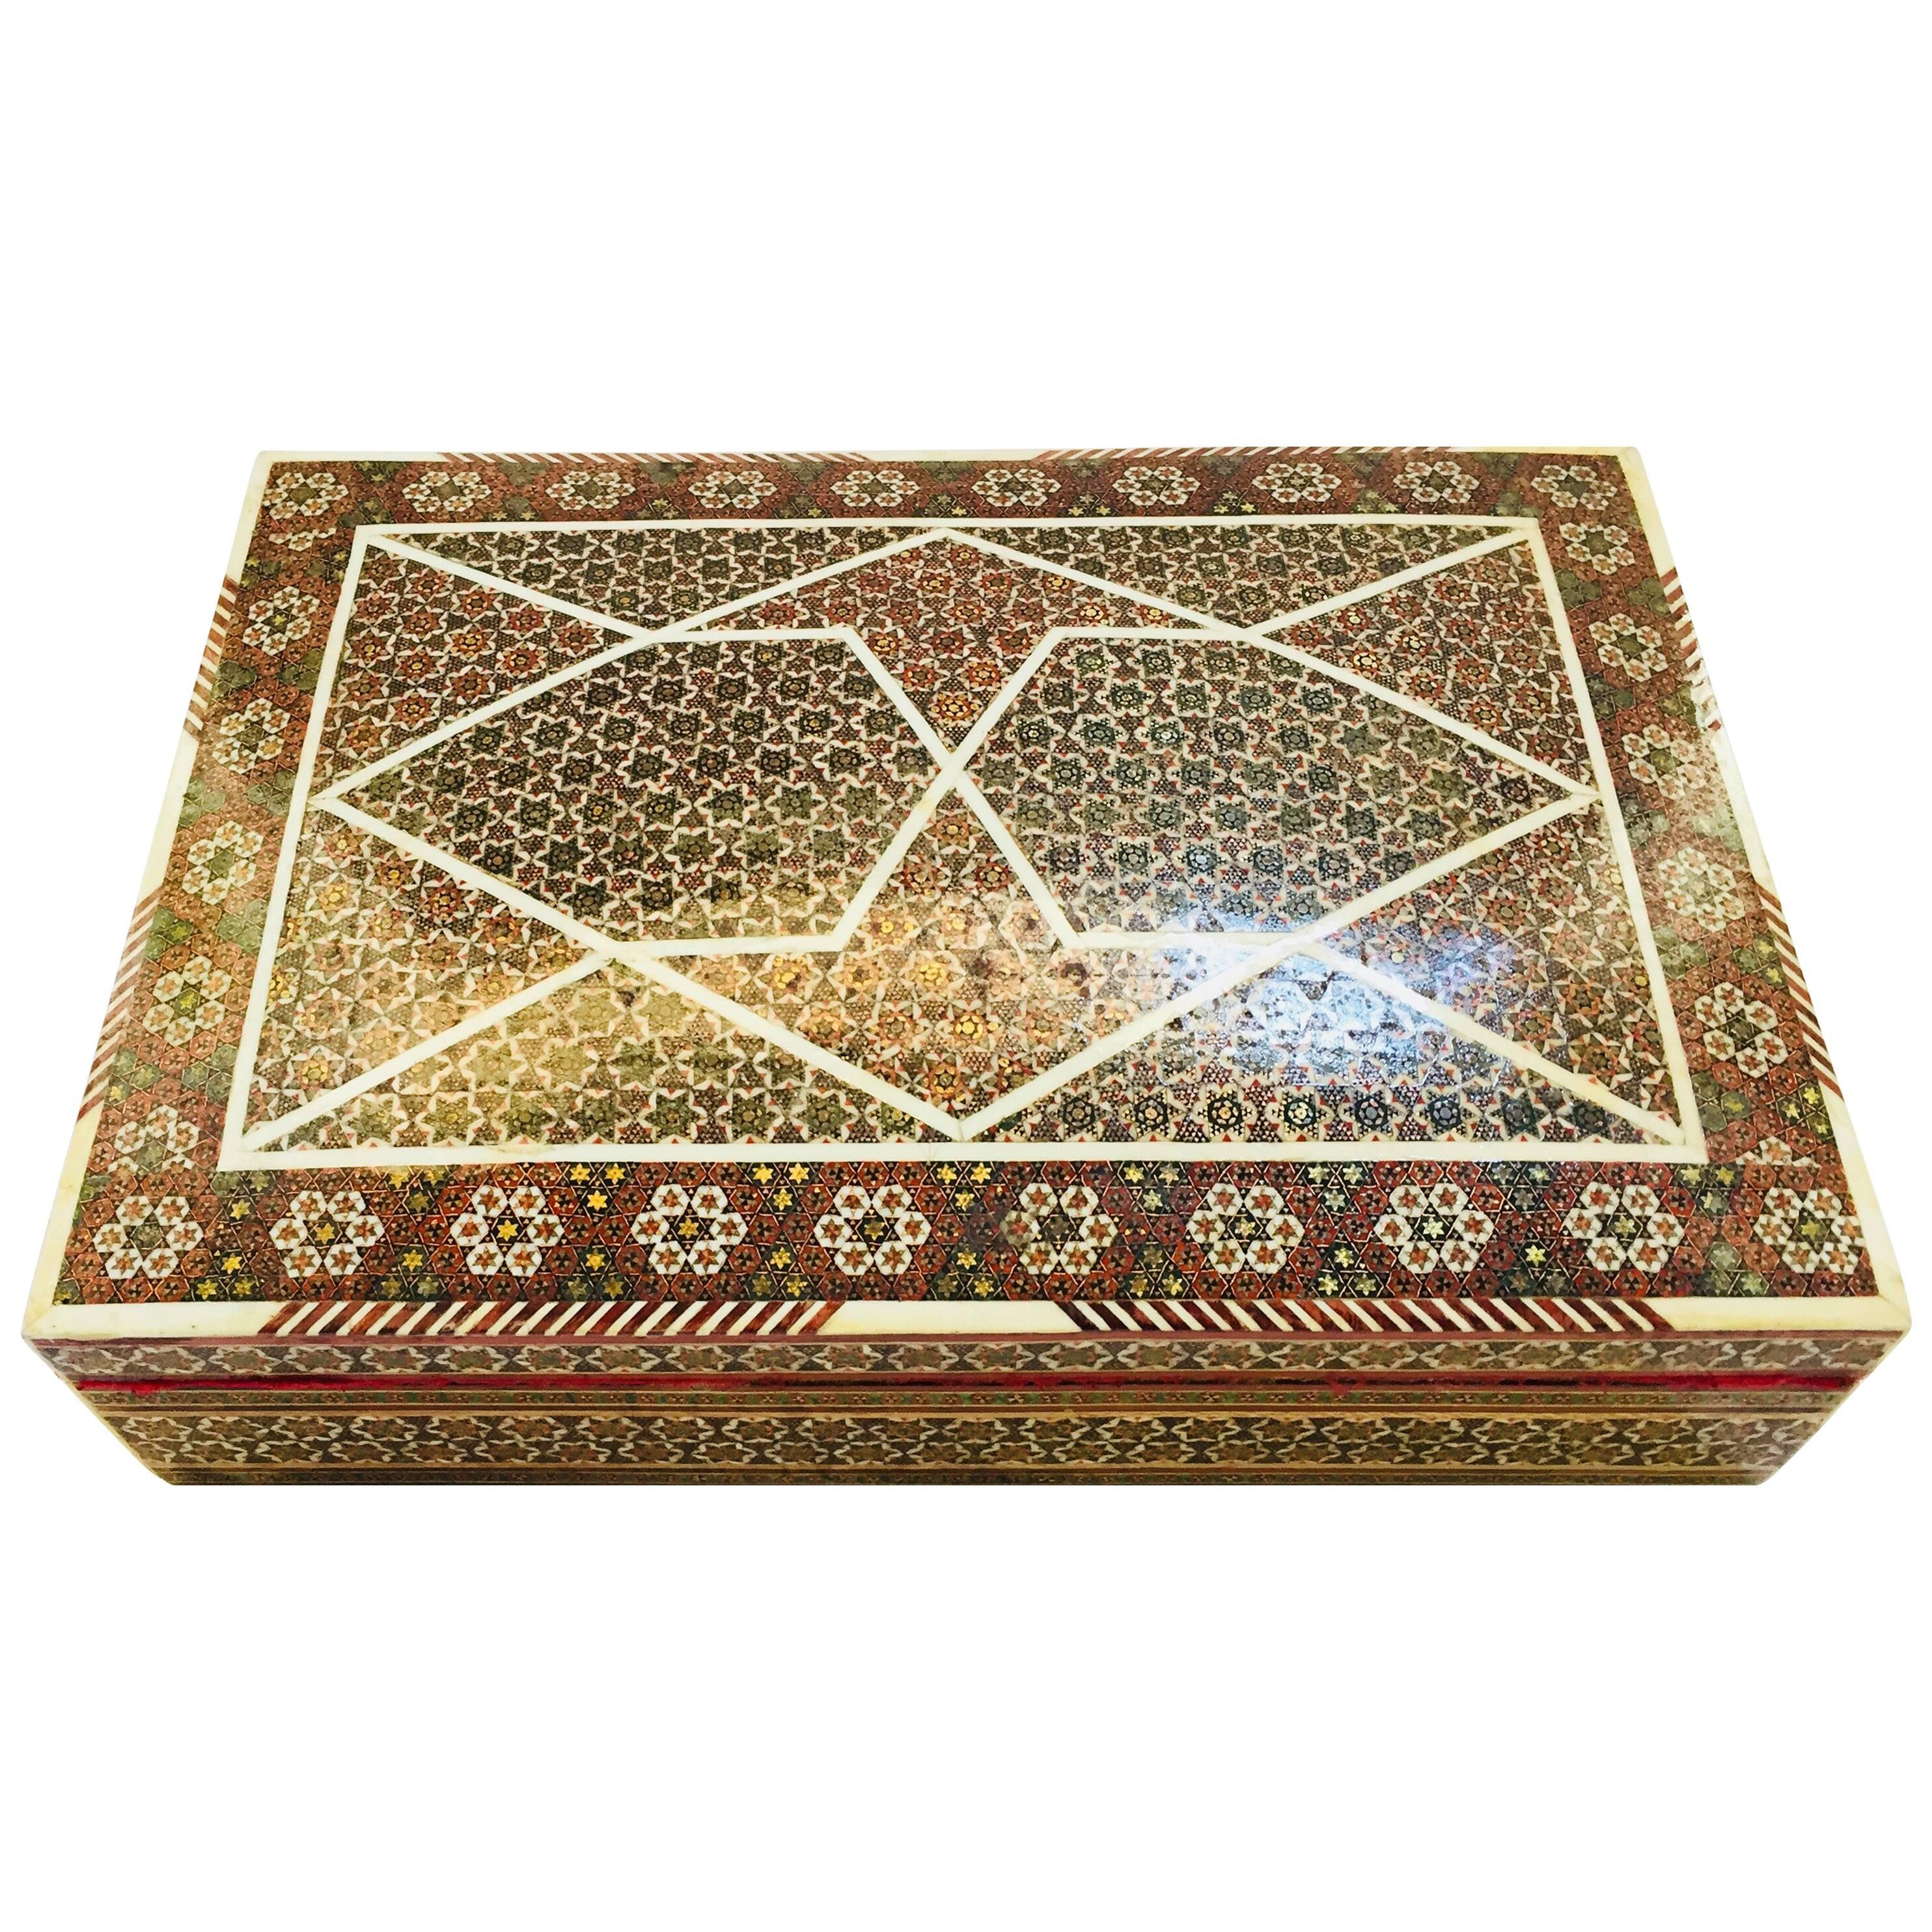 Syrian Mother-of-Pearl Bone Inlay Box